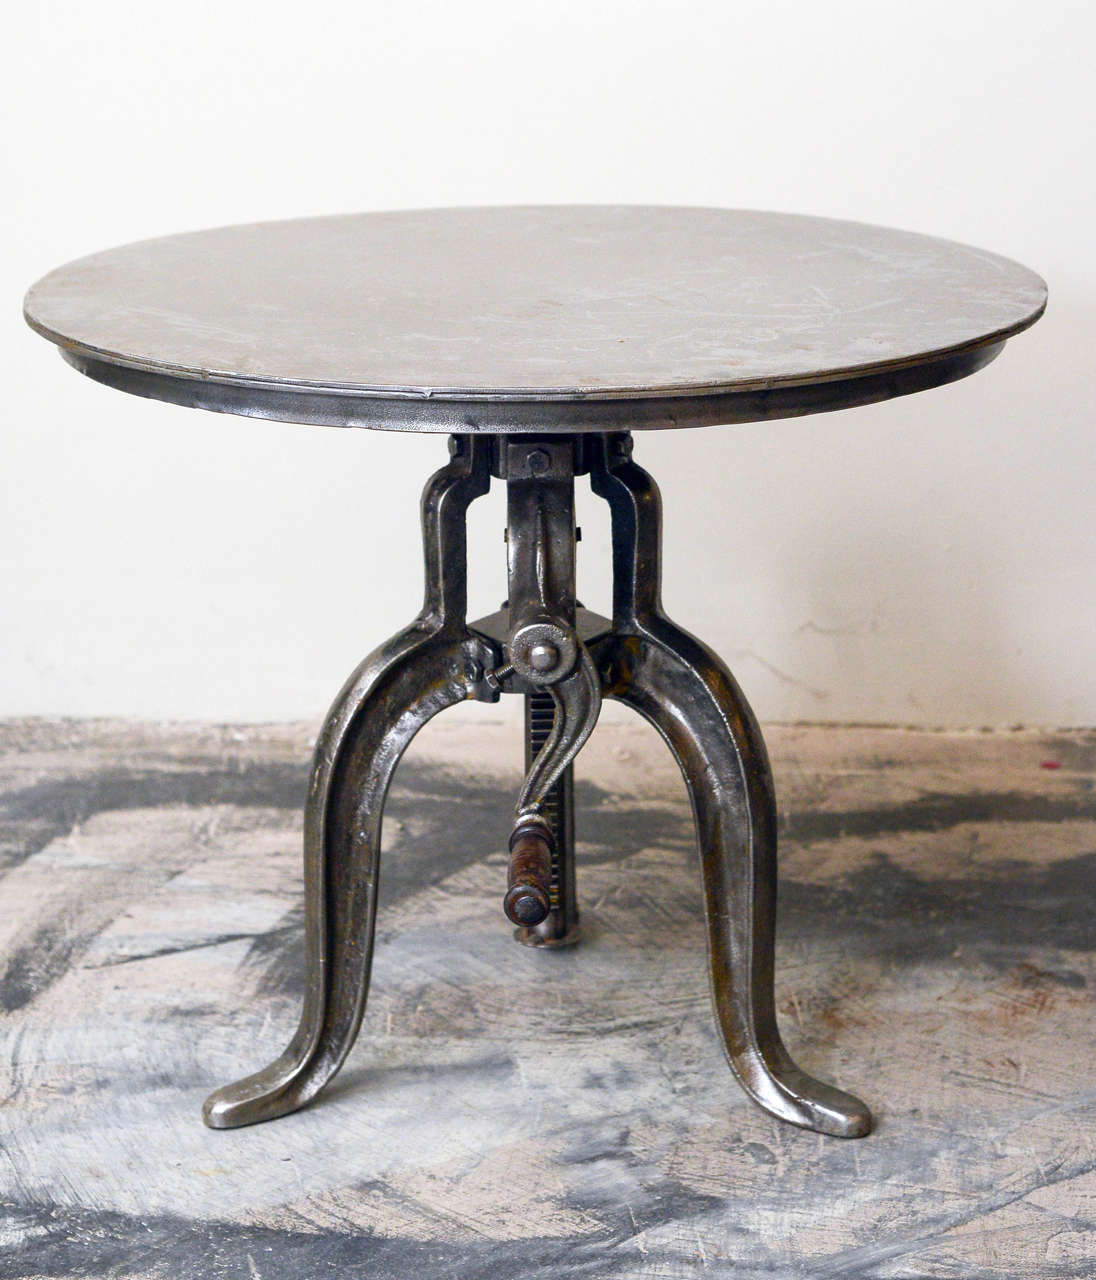 Industrial iron circular adjustable table, circa 1900, height adjusts from 18.5 to 26.75 inches. Would make an excellent drinks, coffee, or end table.